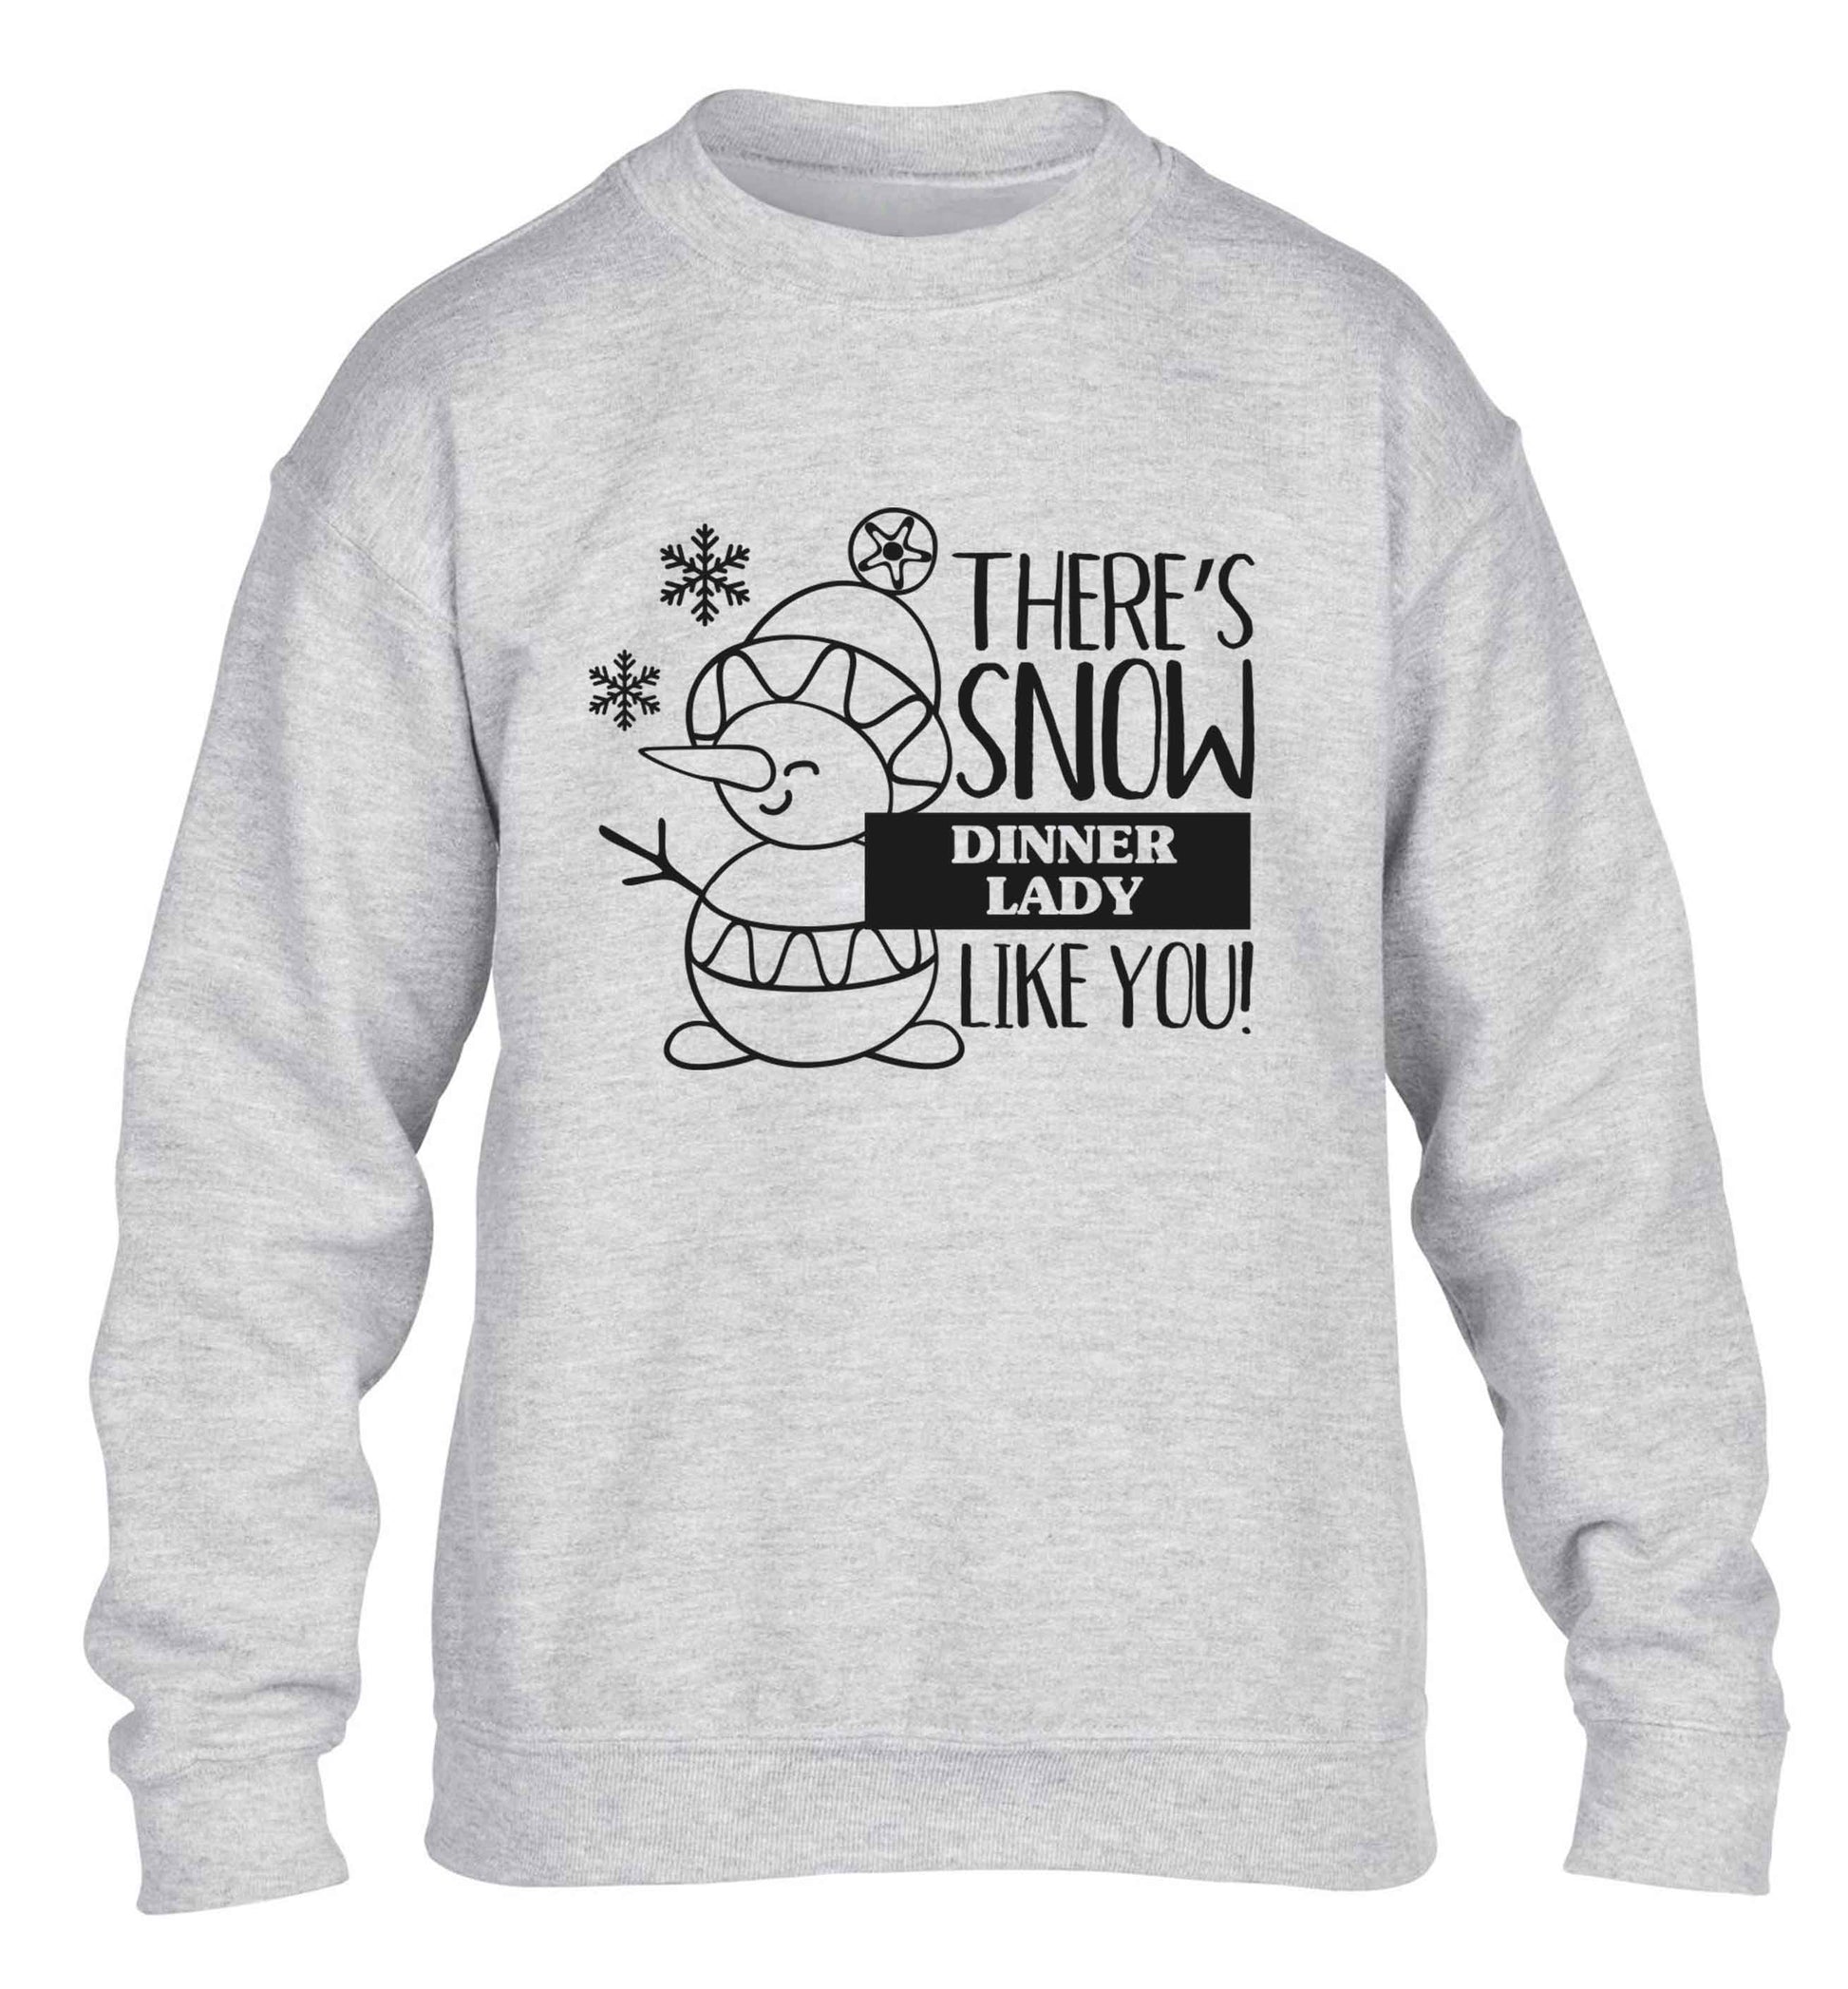 There's snow dinner lady like you children's grey sweater 12-13 Years